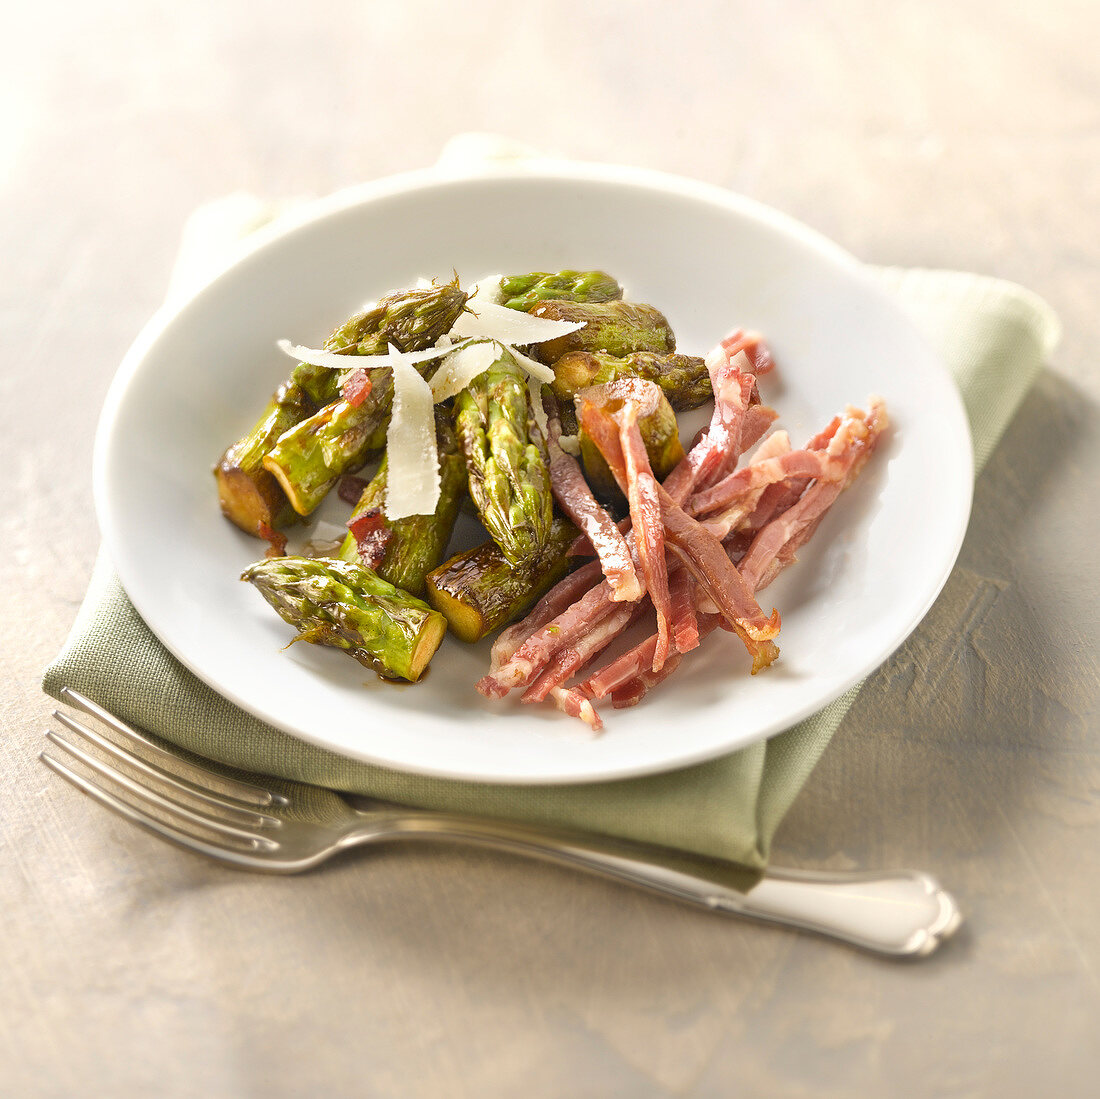 Pan-fried green asparagus with coppa